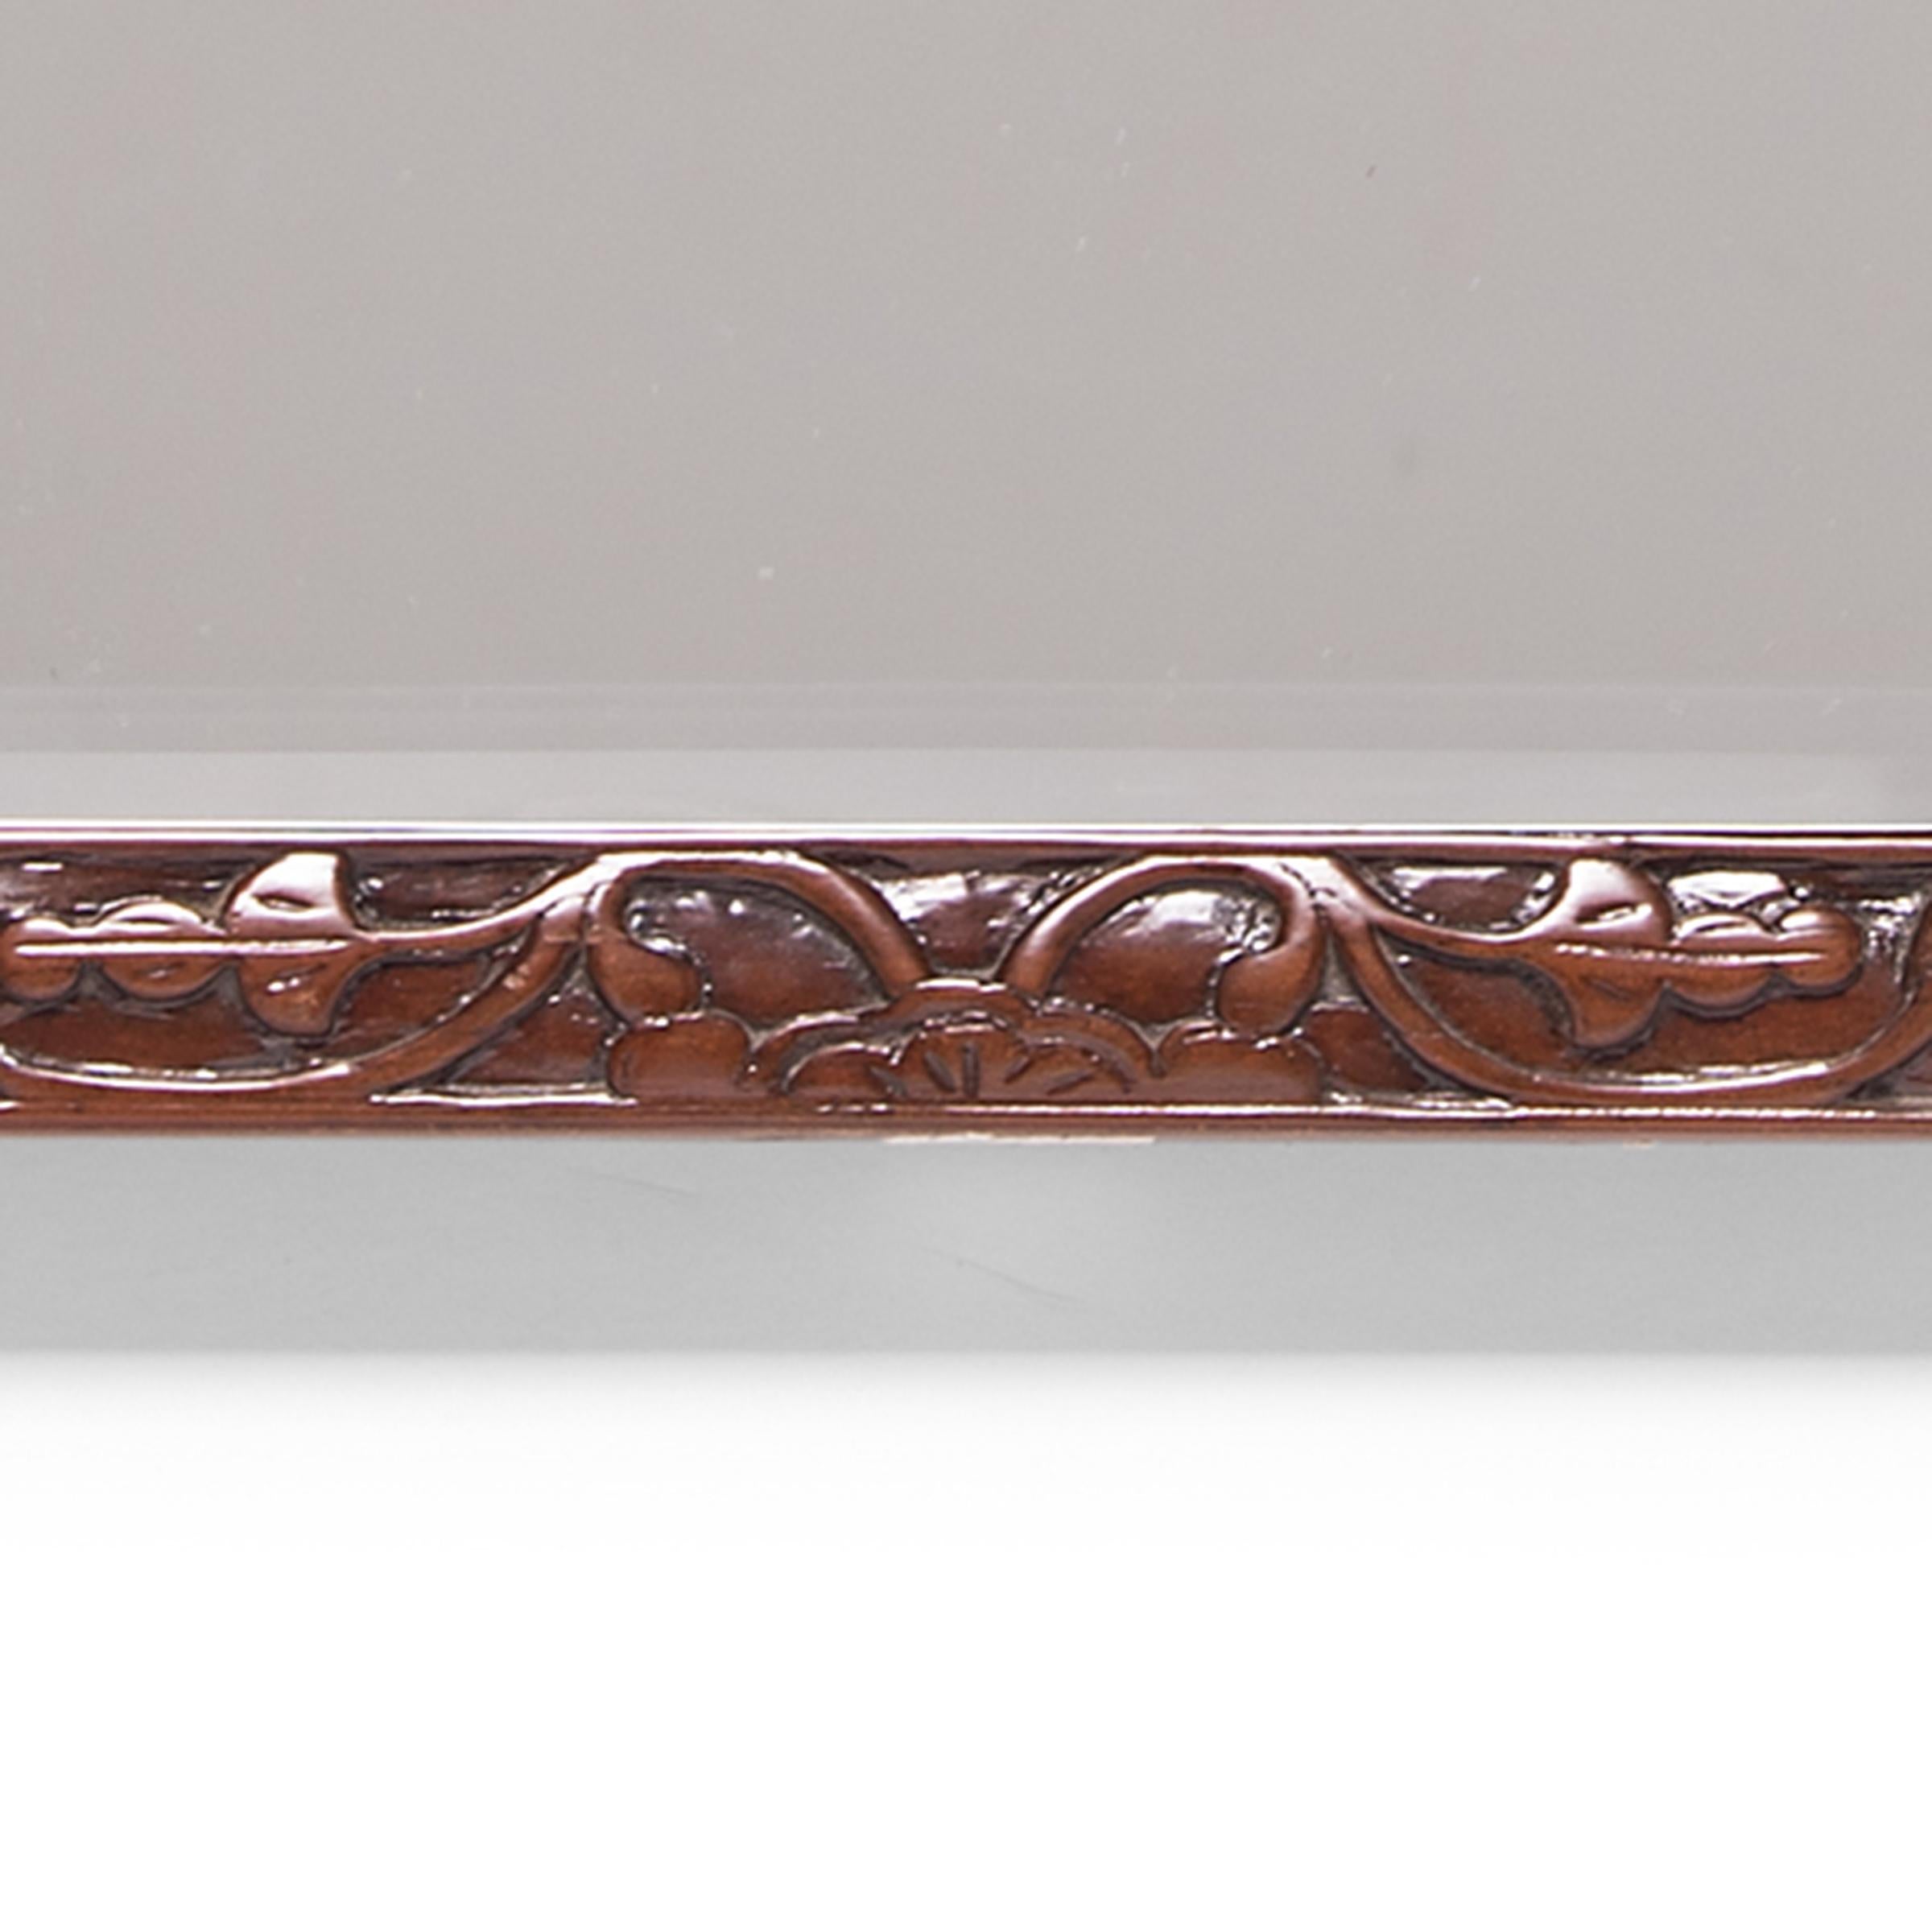 Hand-Carved Chinese Floral Carved Frame with Mirror, c. 1850 For Sale